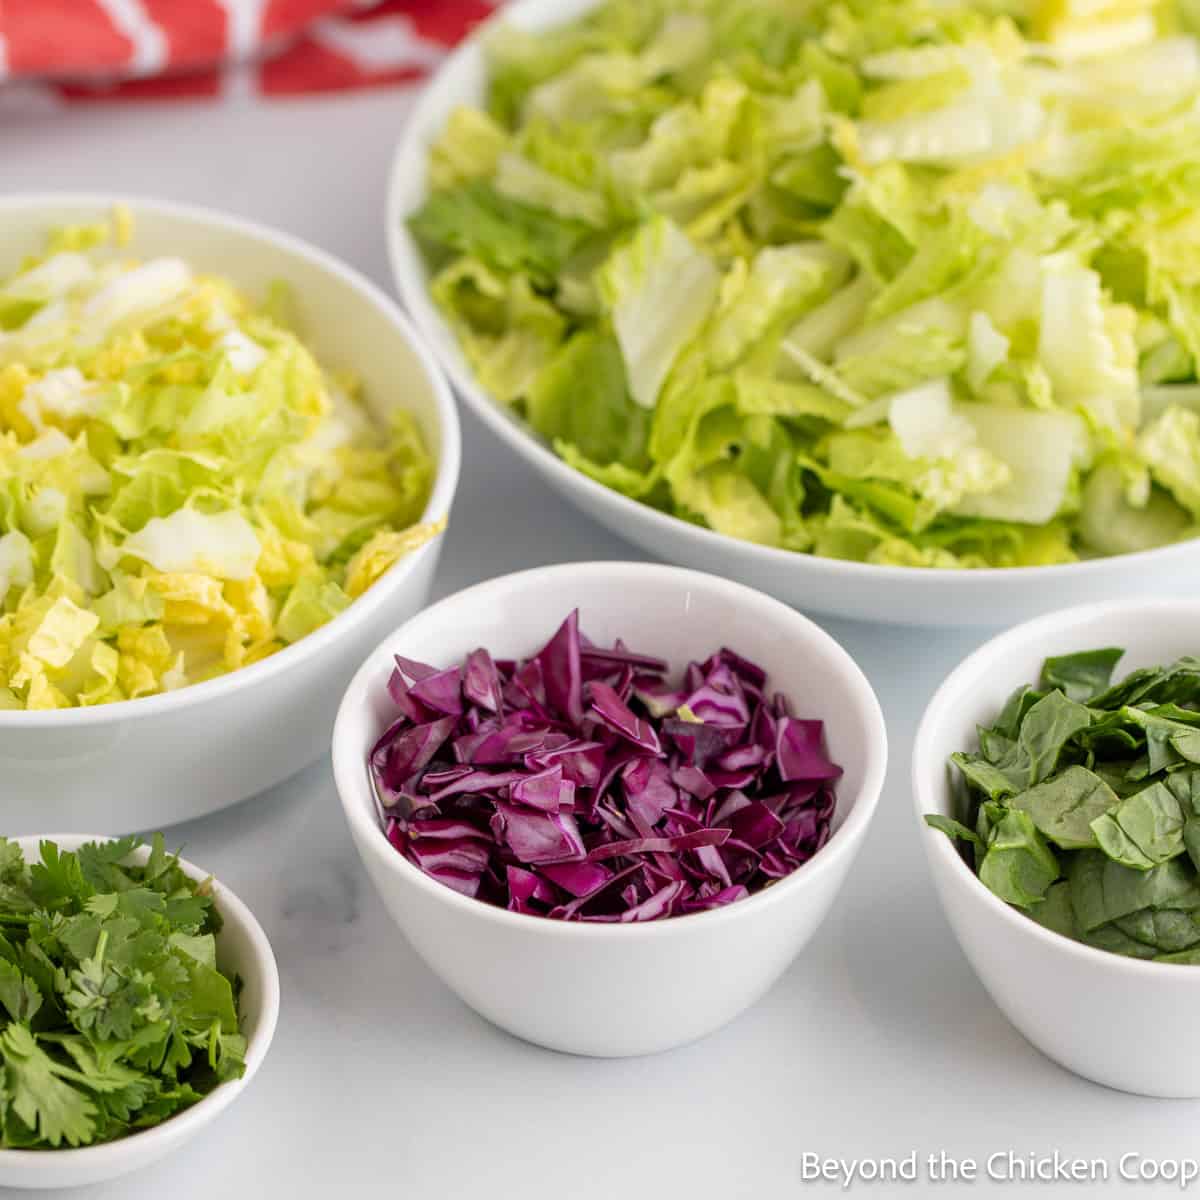 Small bowls of chopped lettuce and cabbage. 